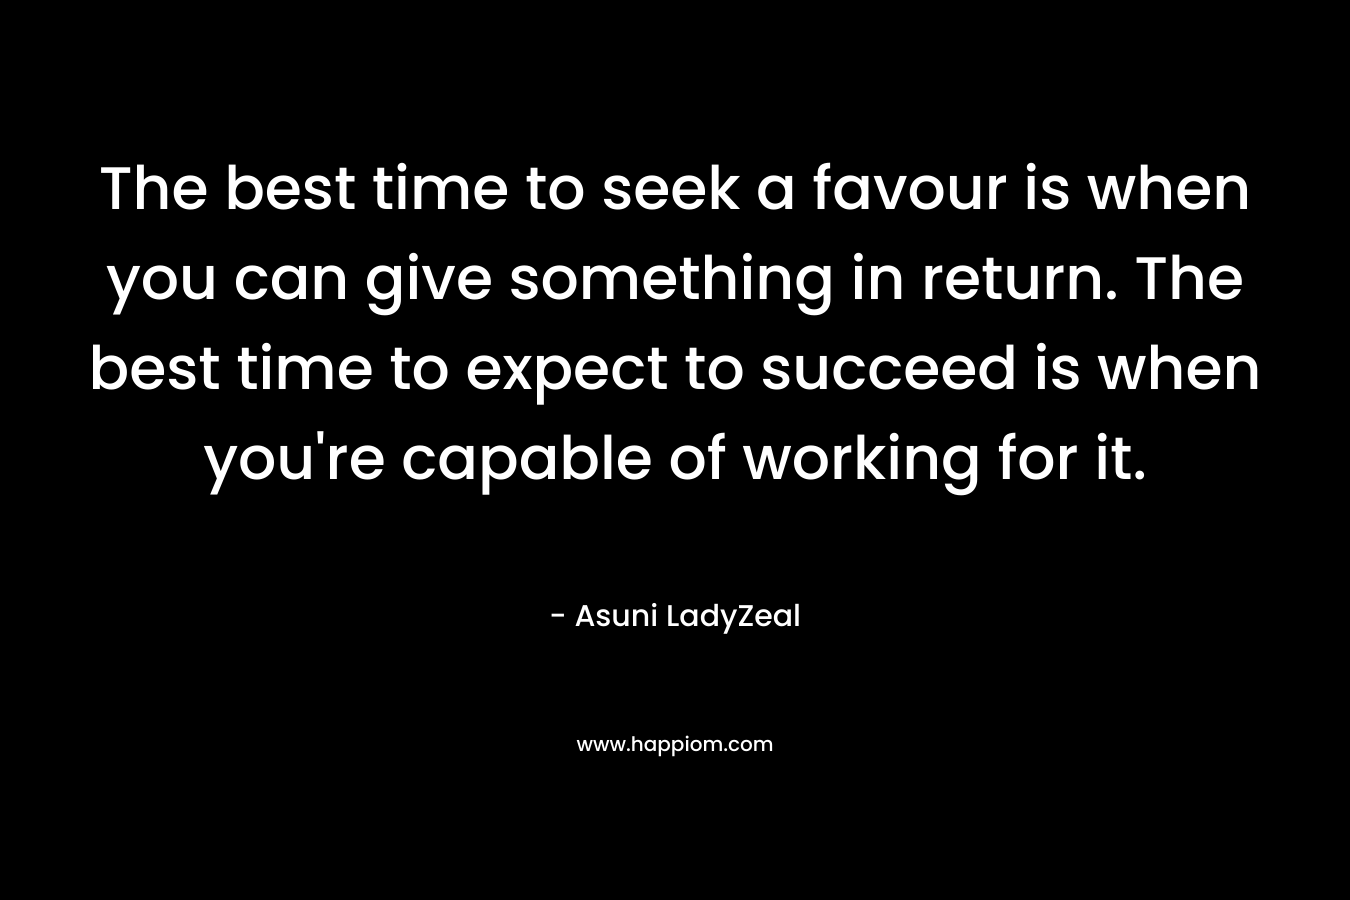 The best time to seek a favour is when you can give something in return. The best time to expect to succeed is when you're capable of working for it.